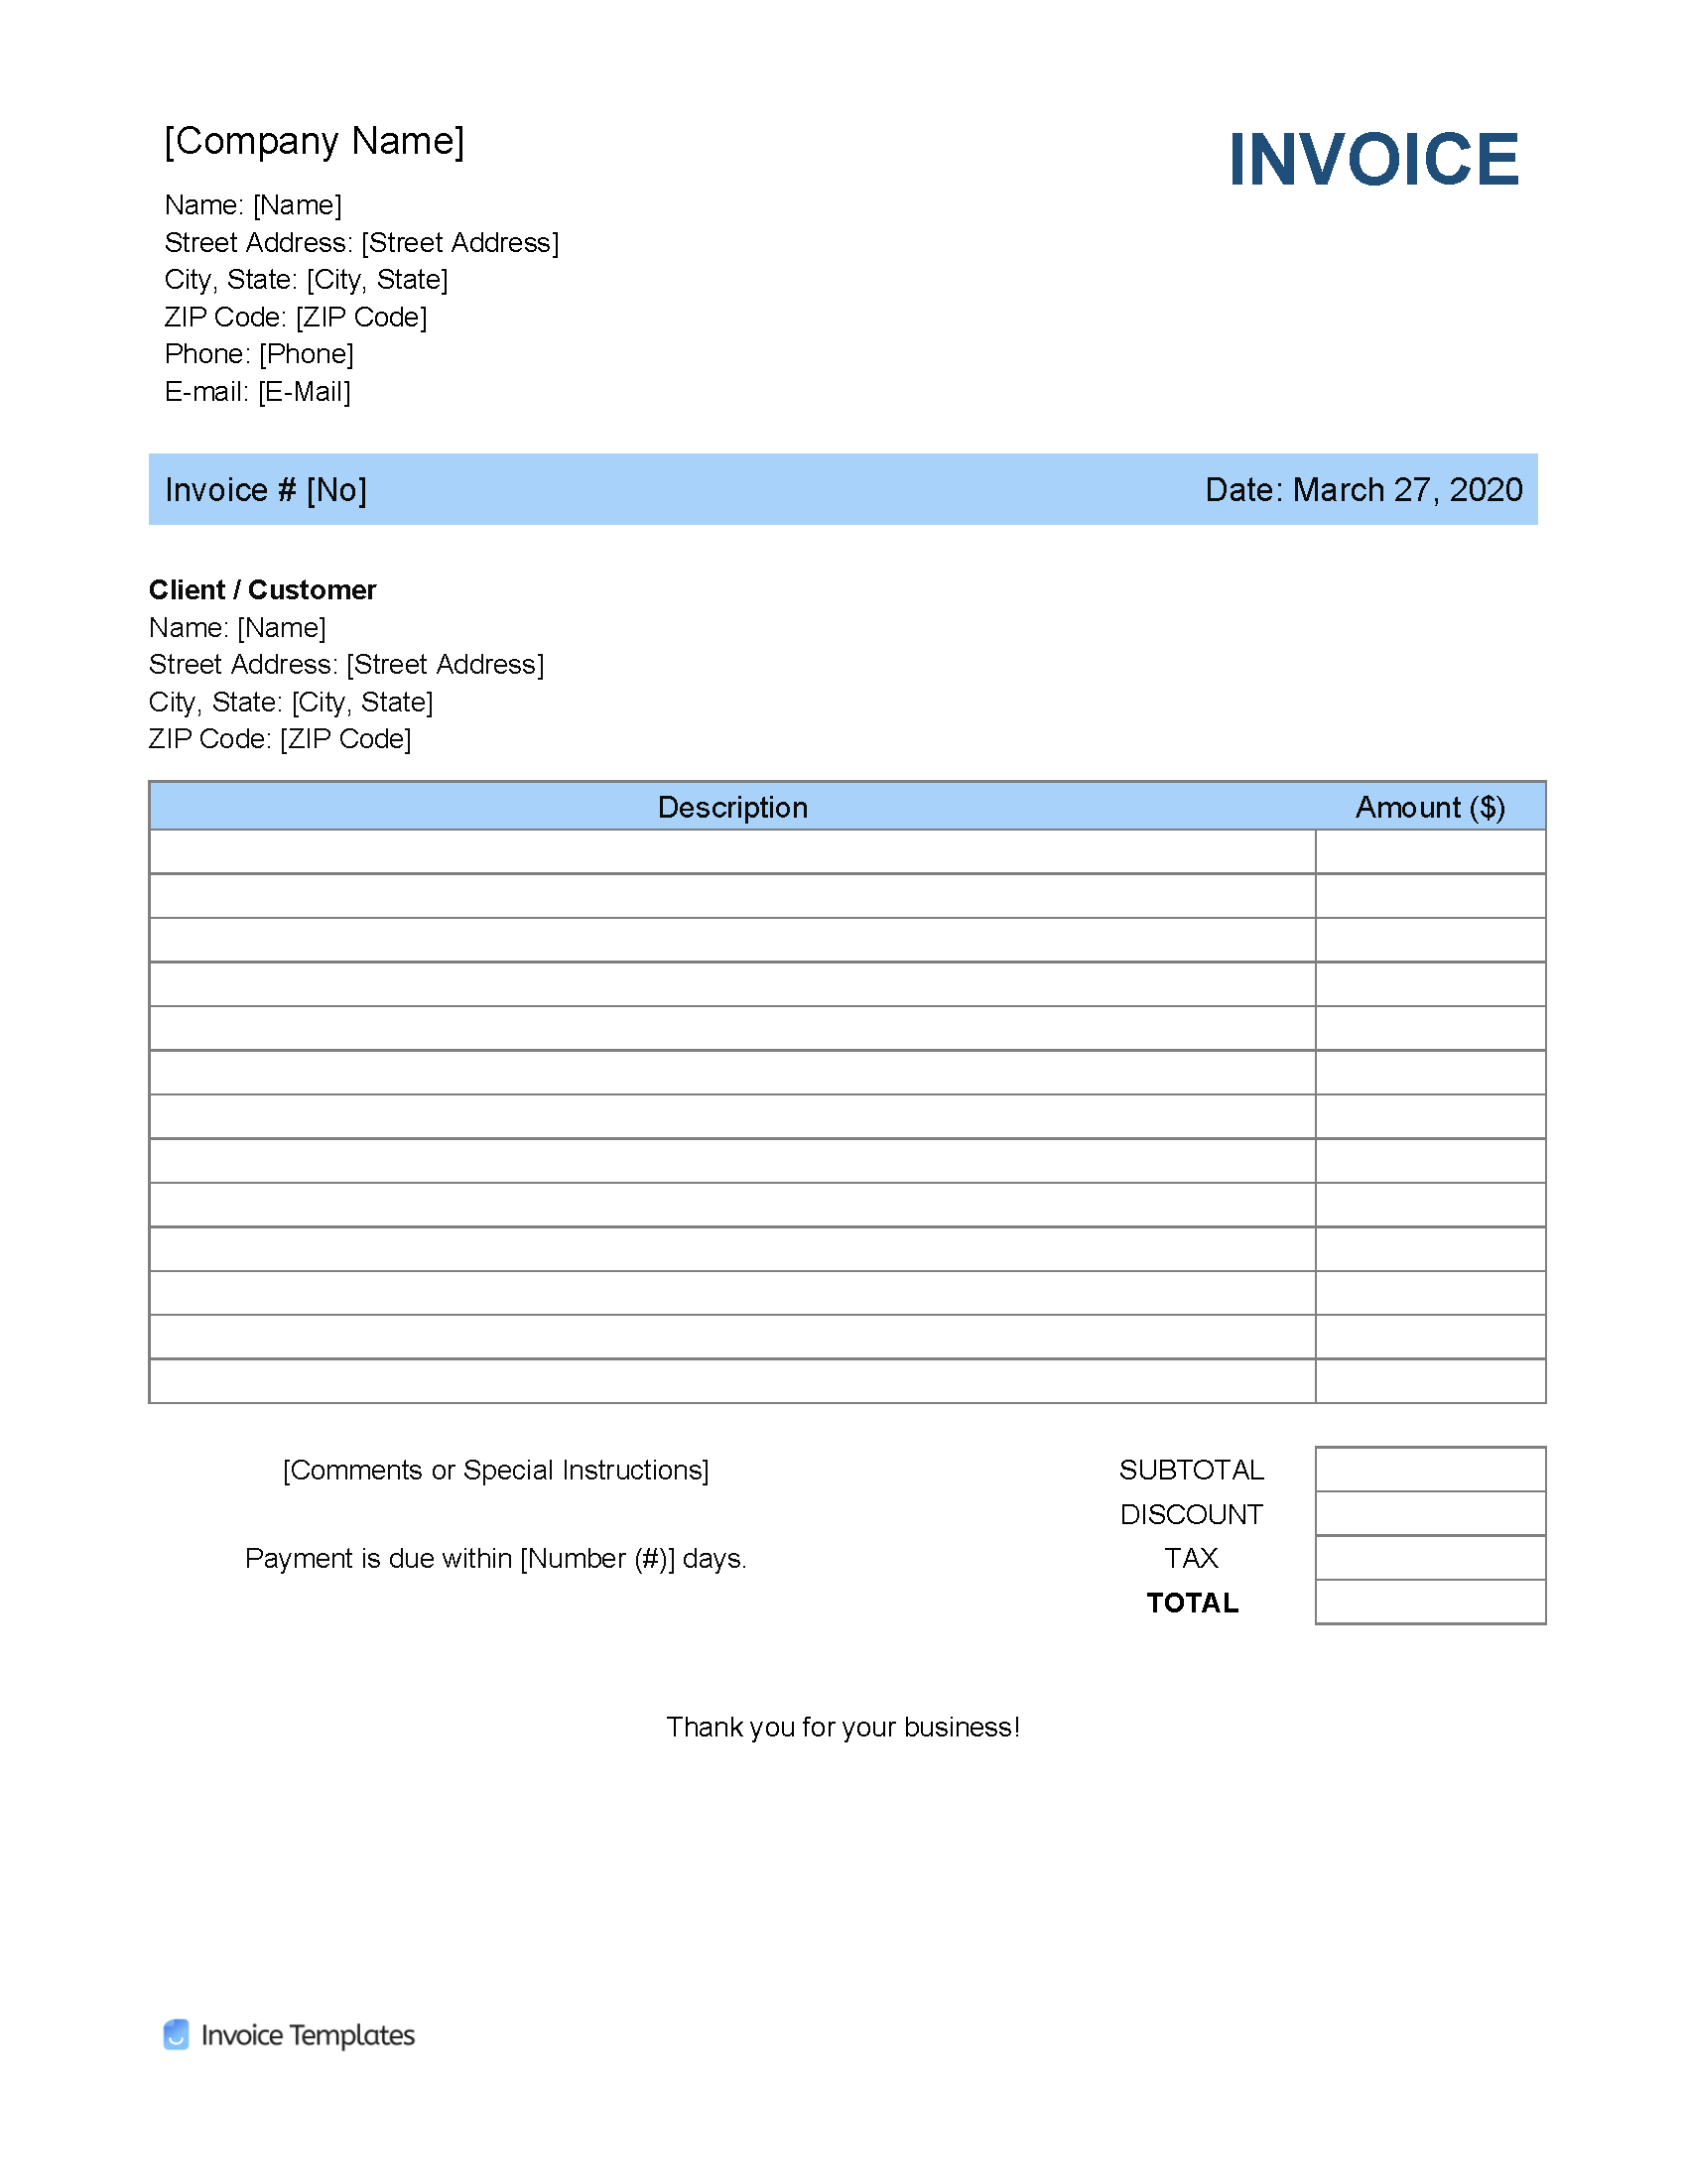 Online Invoice Template Word from invoicetemplates.com